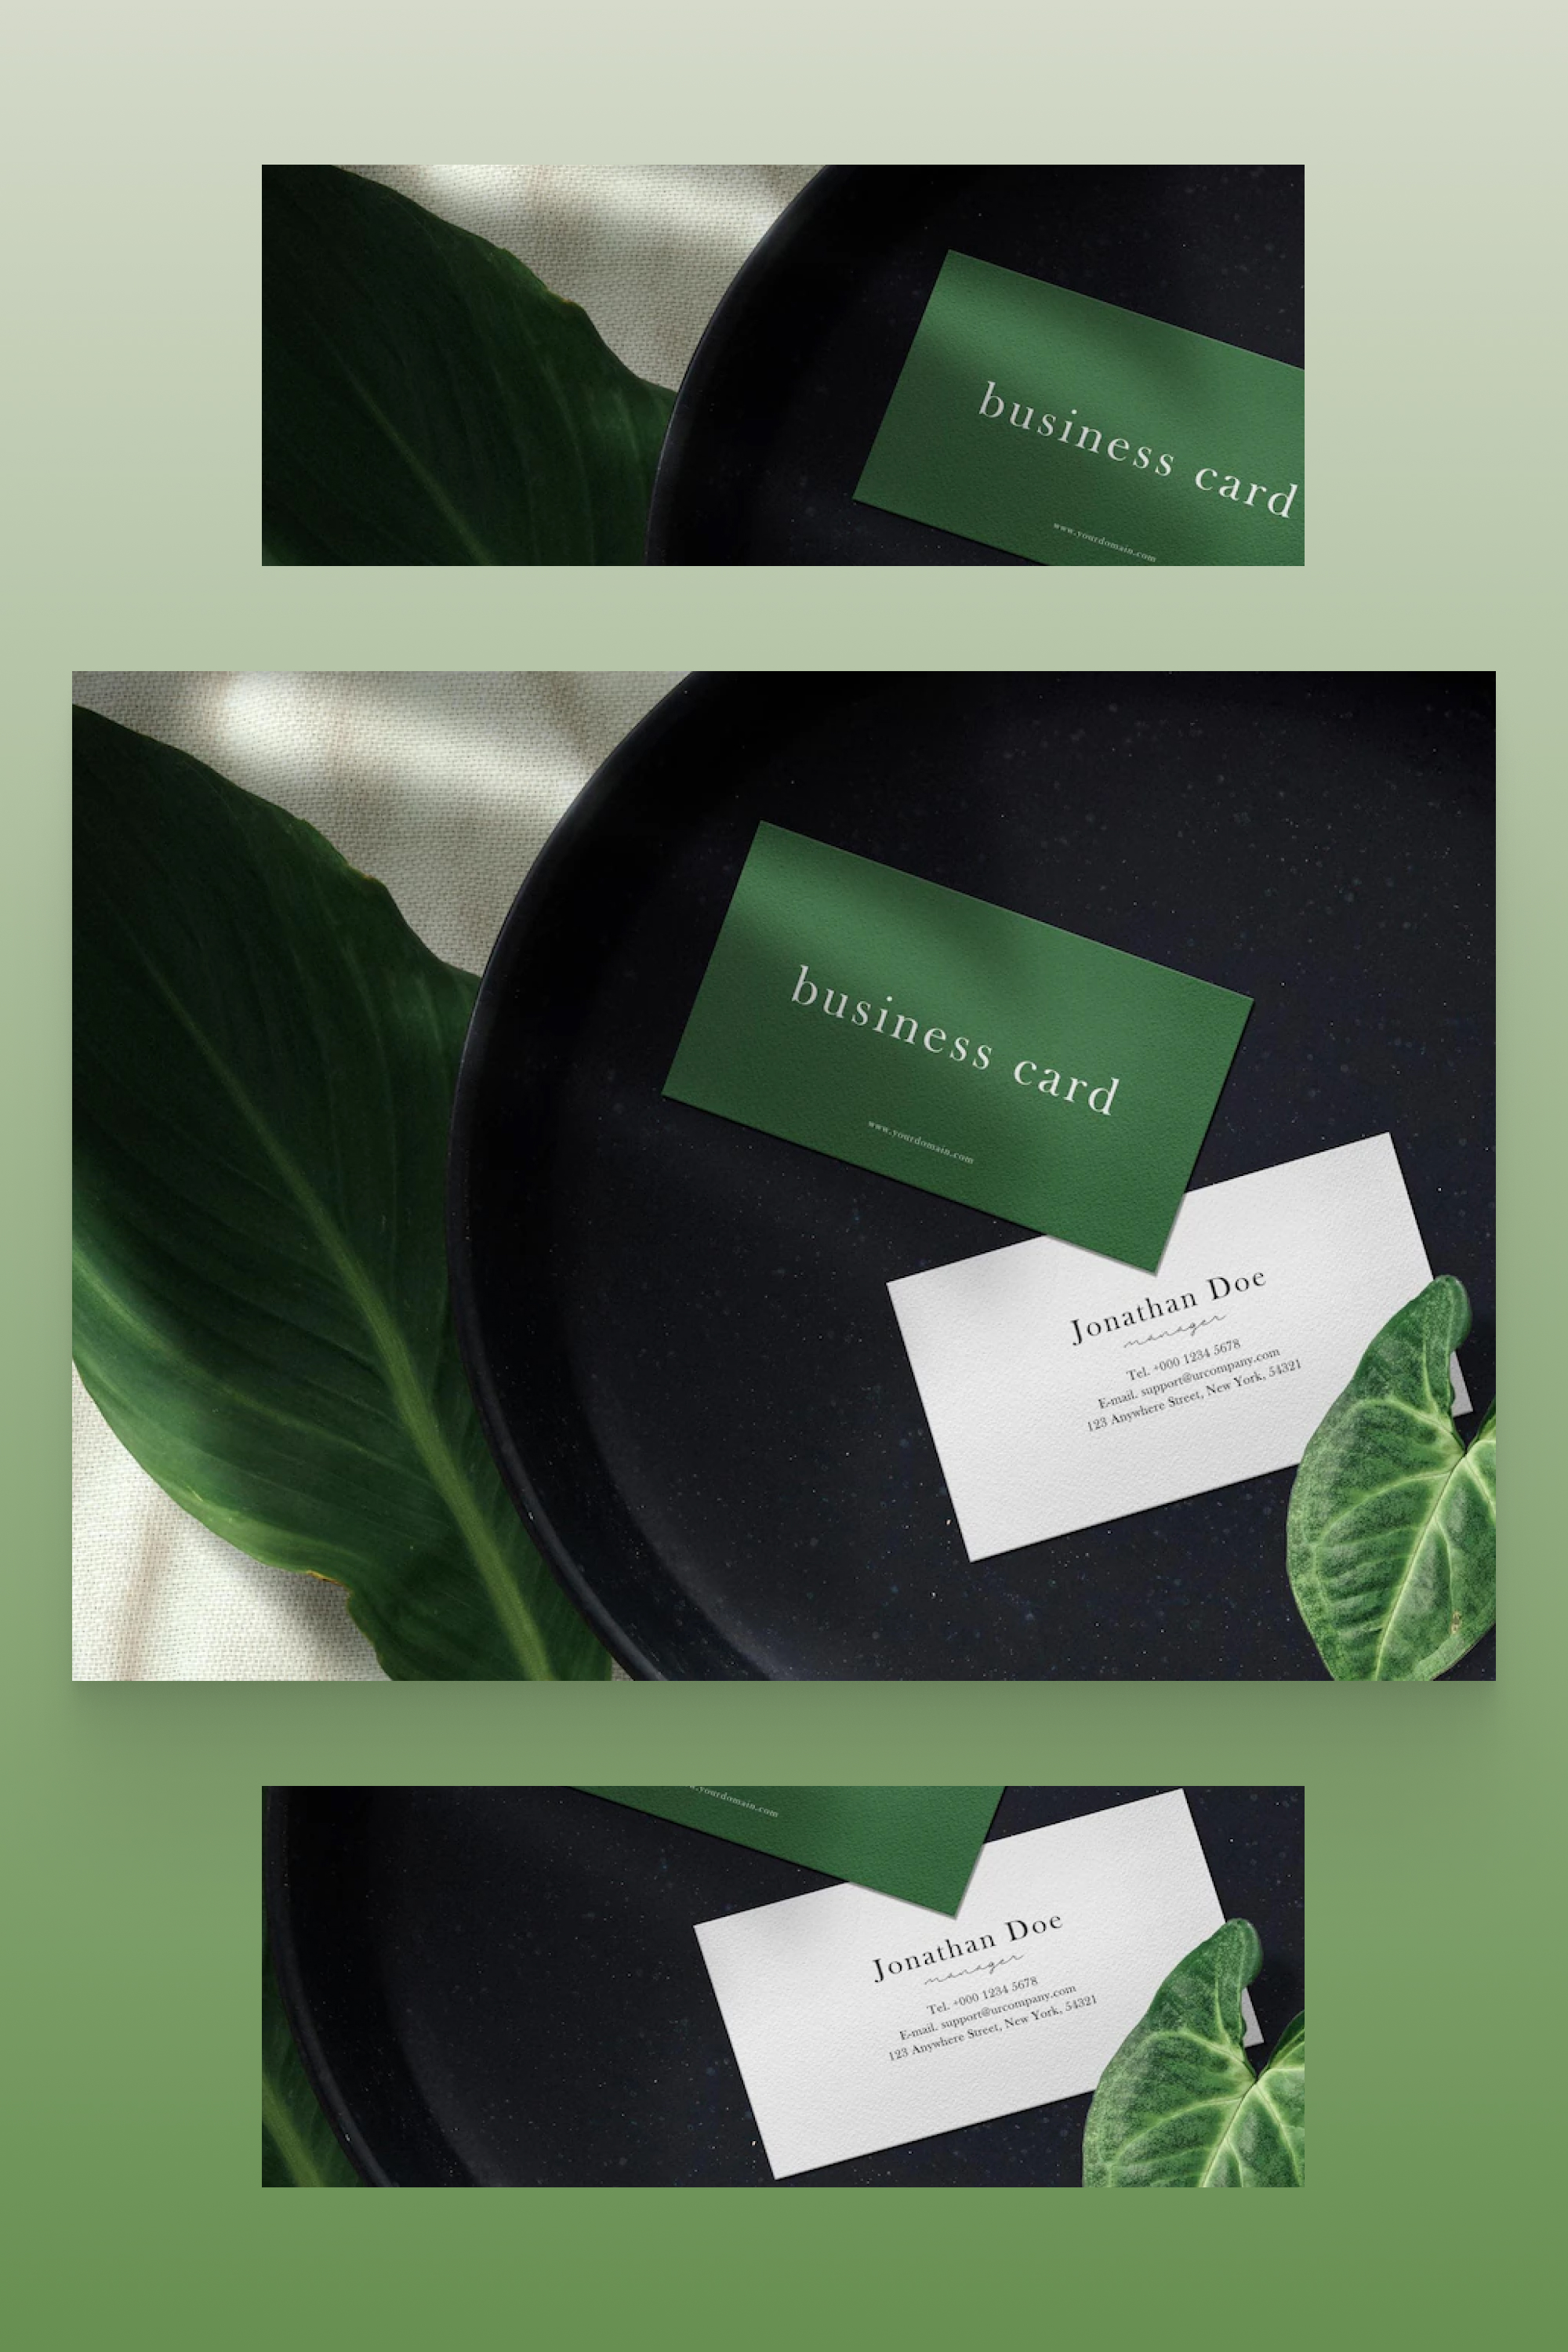 Green and white business cards on a black plate with green leaves.